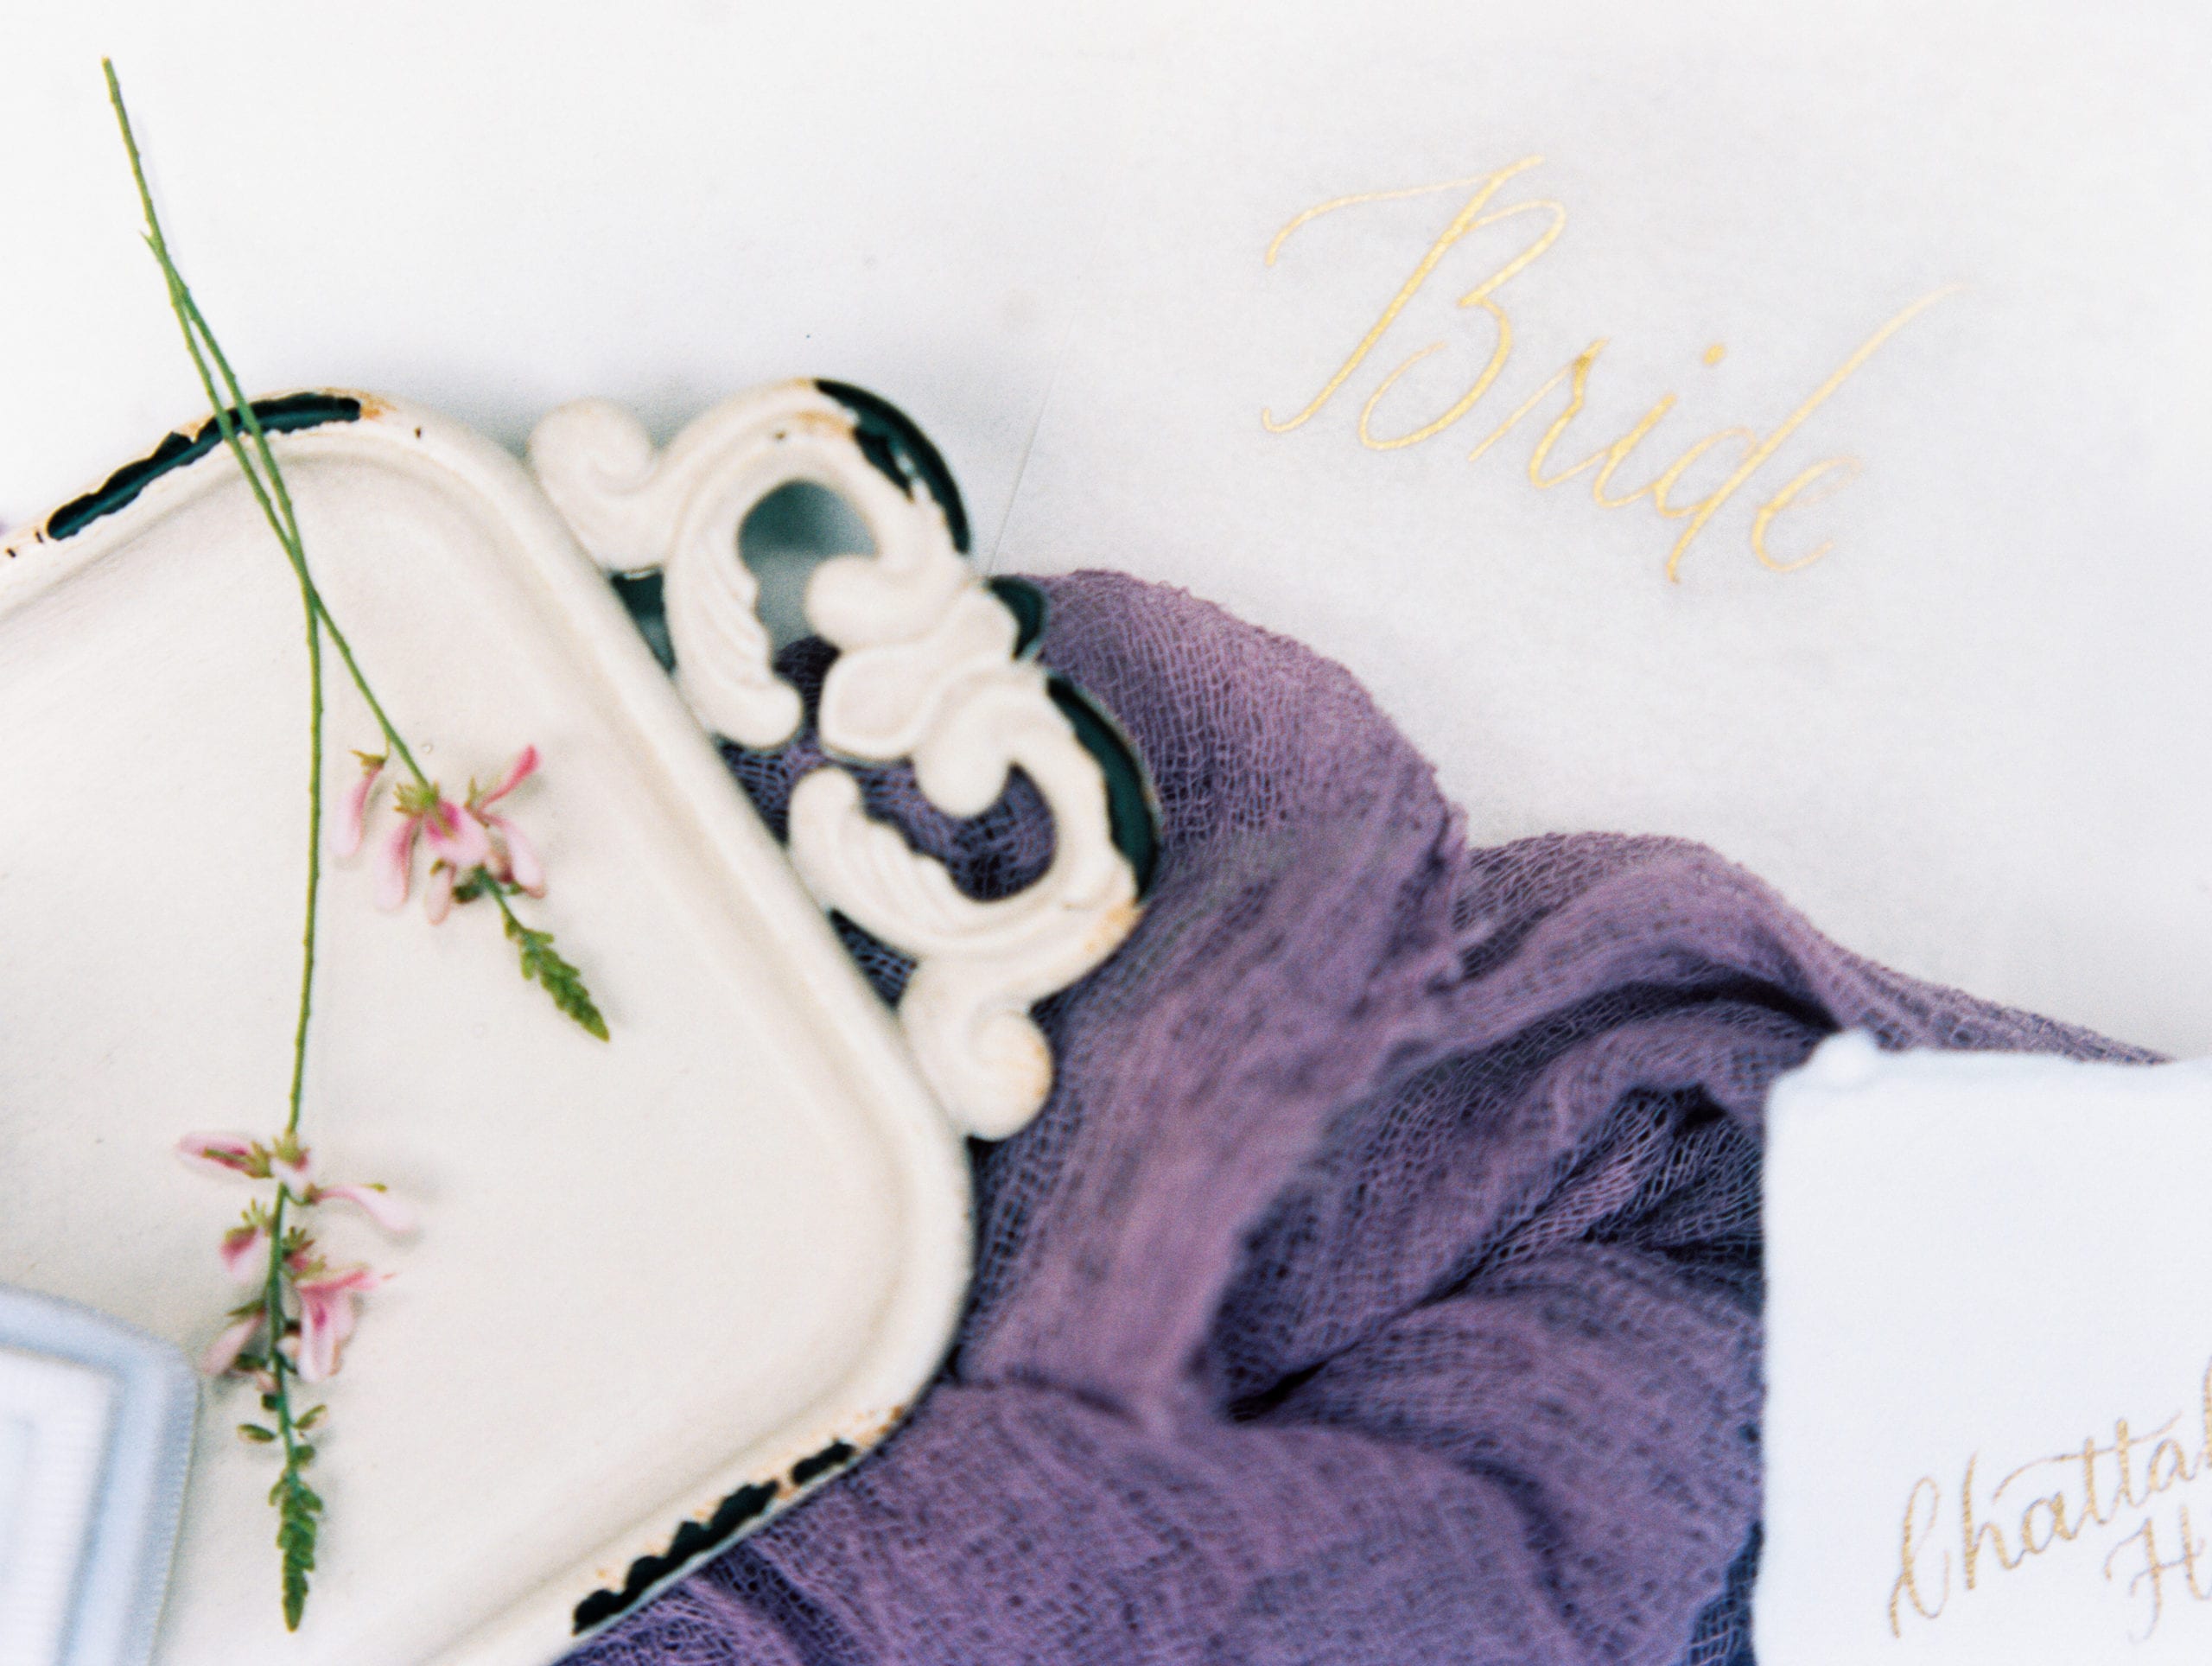 Wedding details by fine art film photographer J.J. Au'Clair, styled by G&A weddings and the prissy plate company.